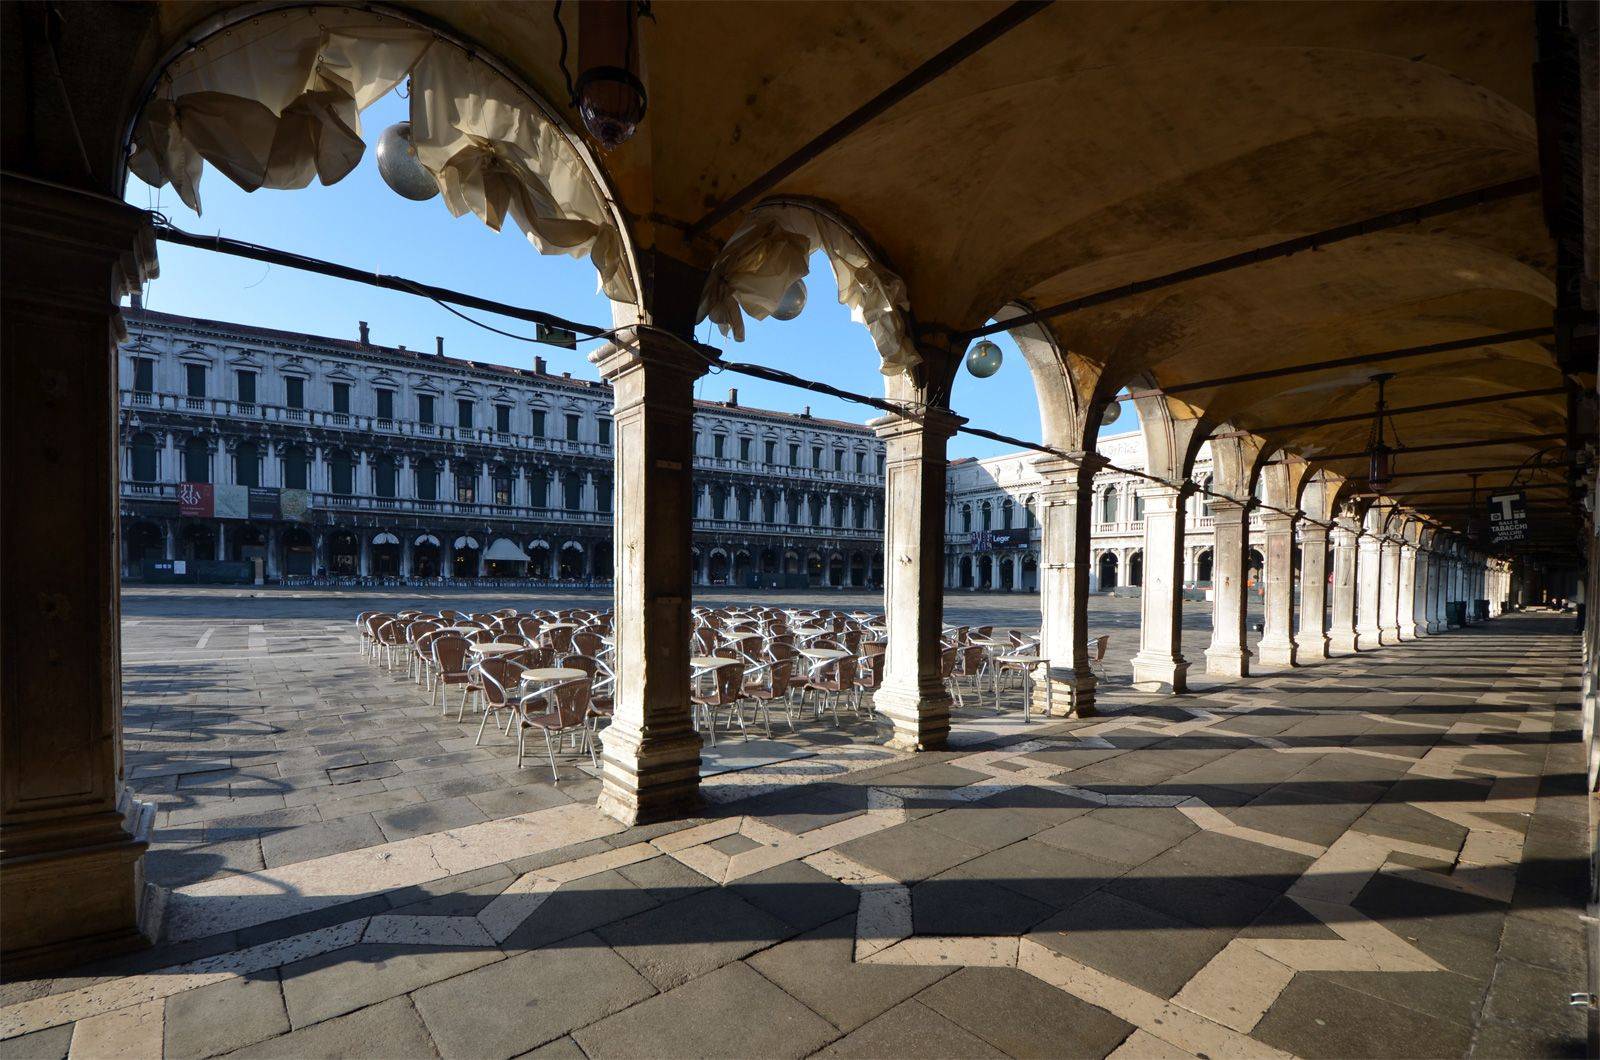 walking out the door of the Falier find yourself in Piazza San Marco!